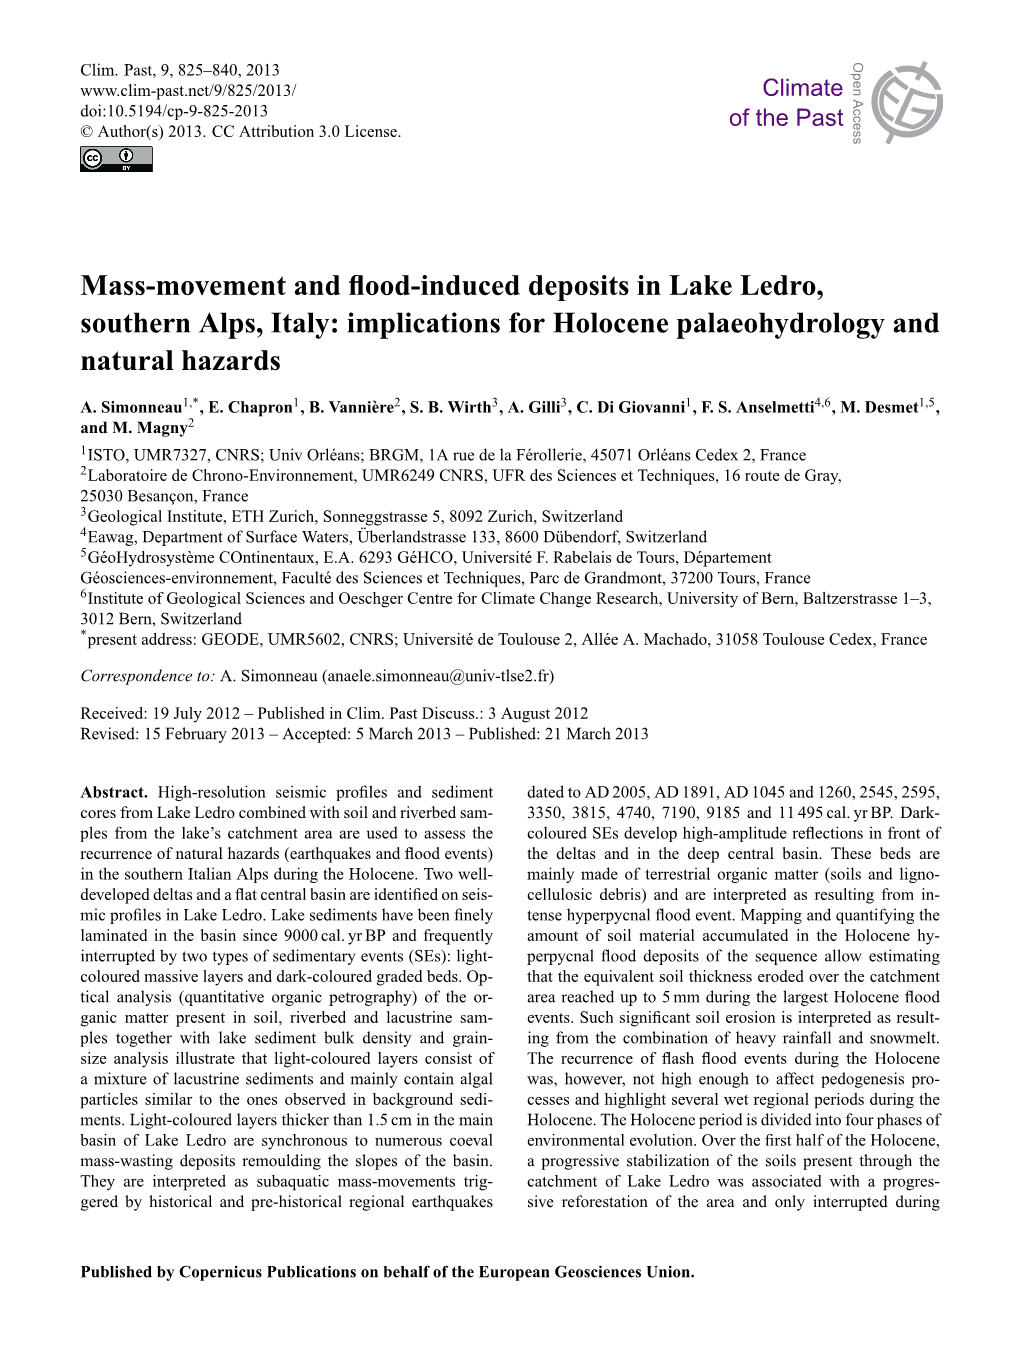 Mass-Movement and Flood-Induced Deposits in Lake Ledro, Southern